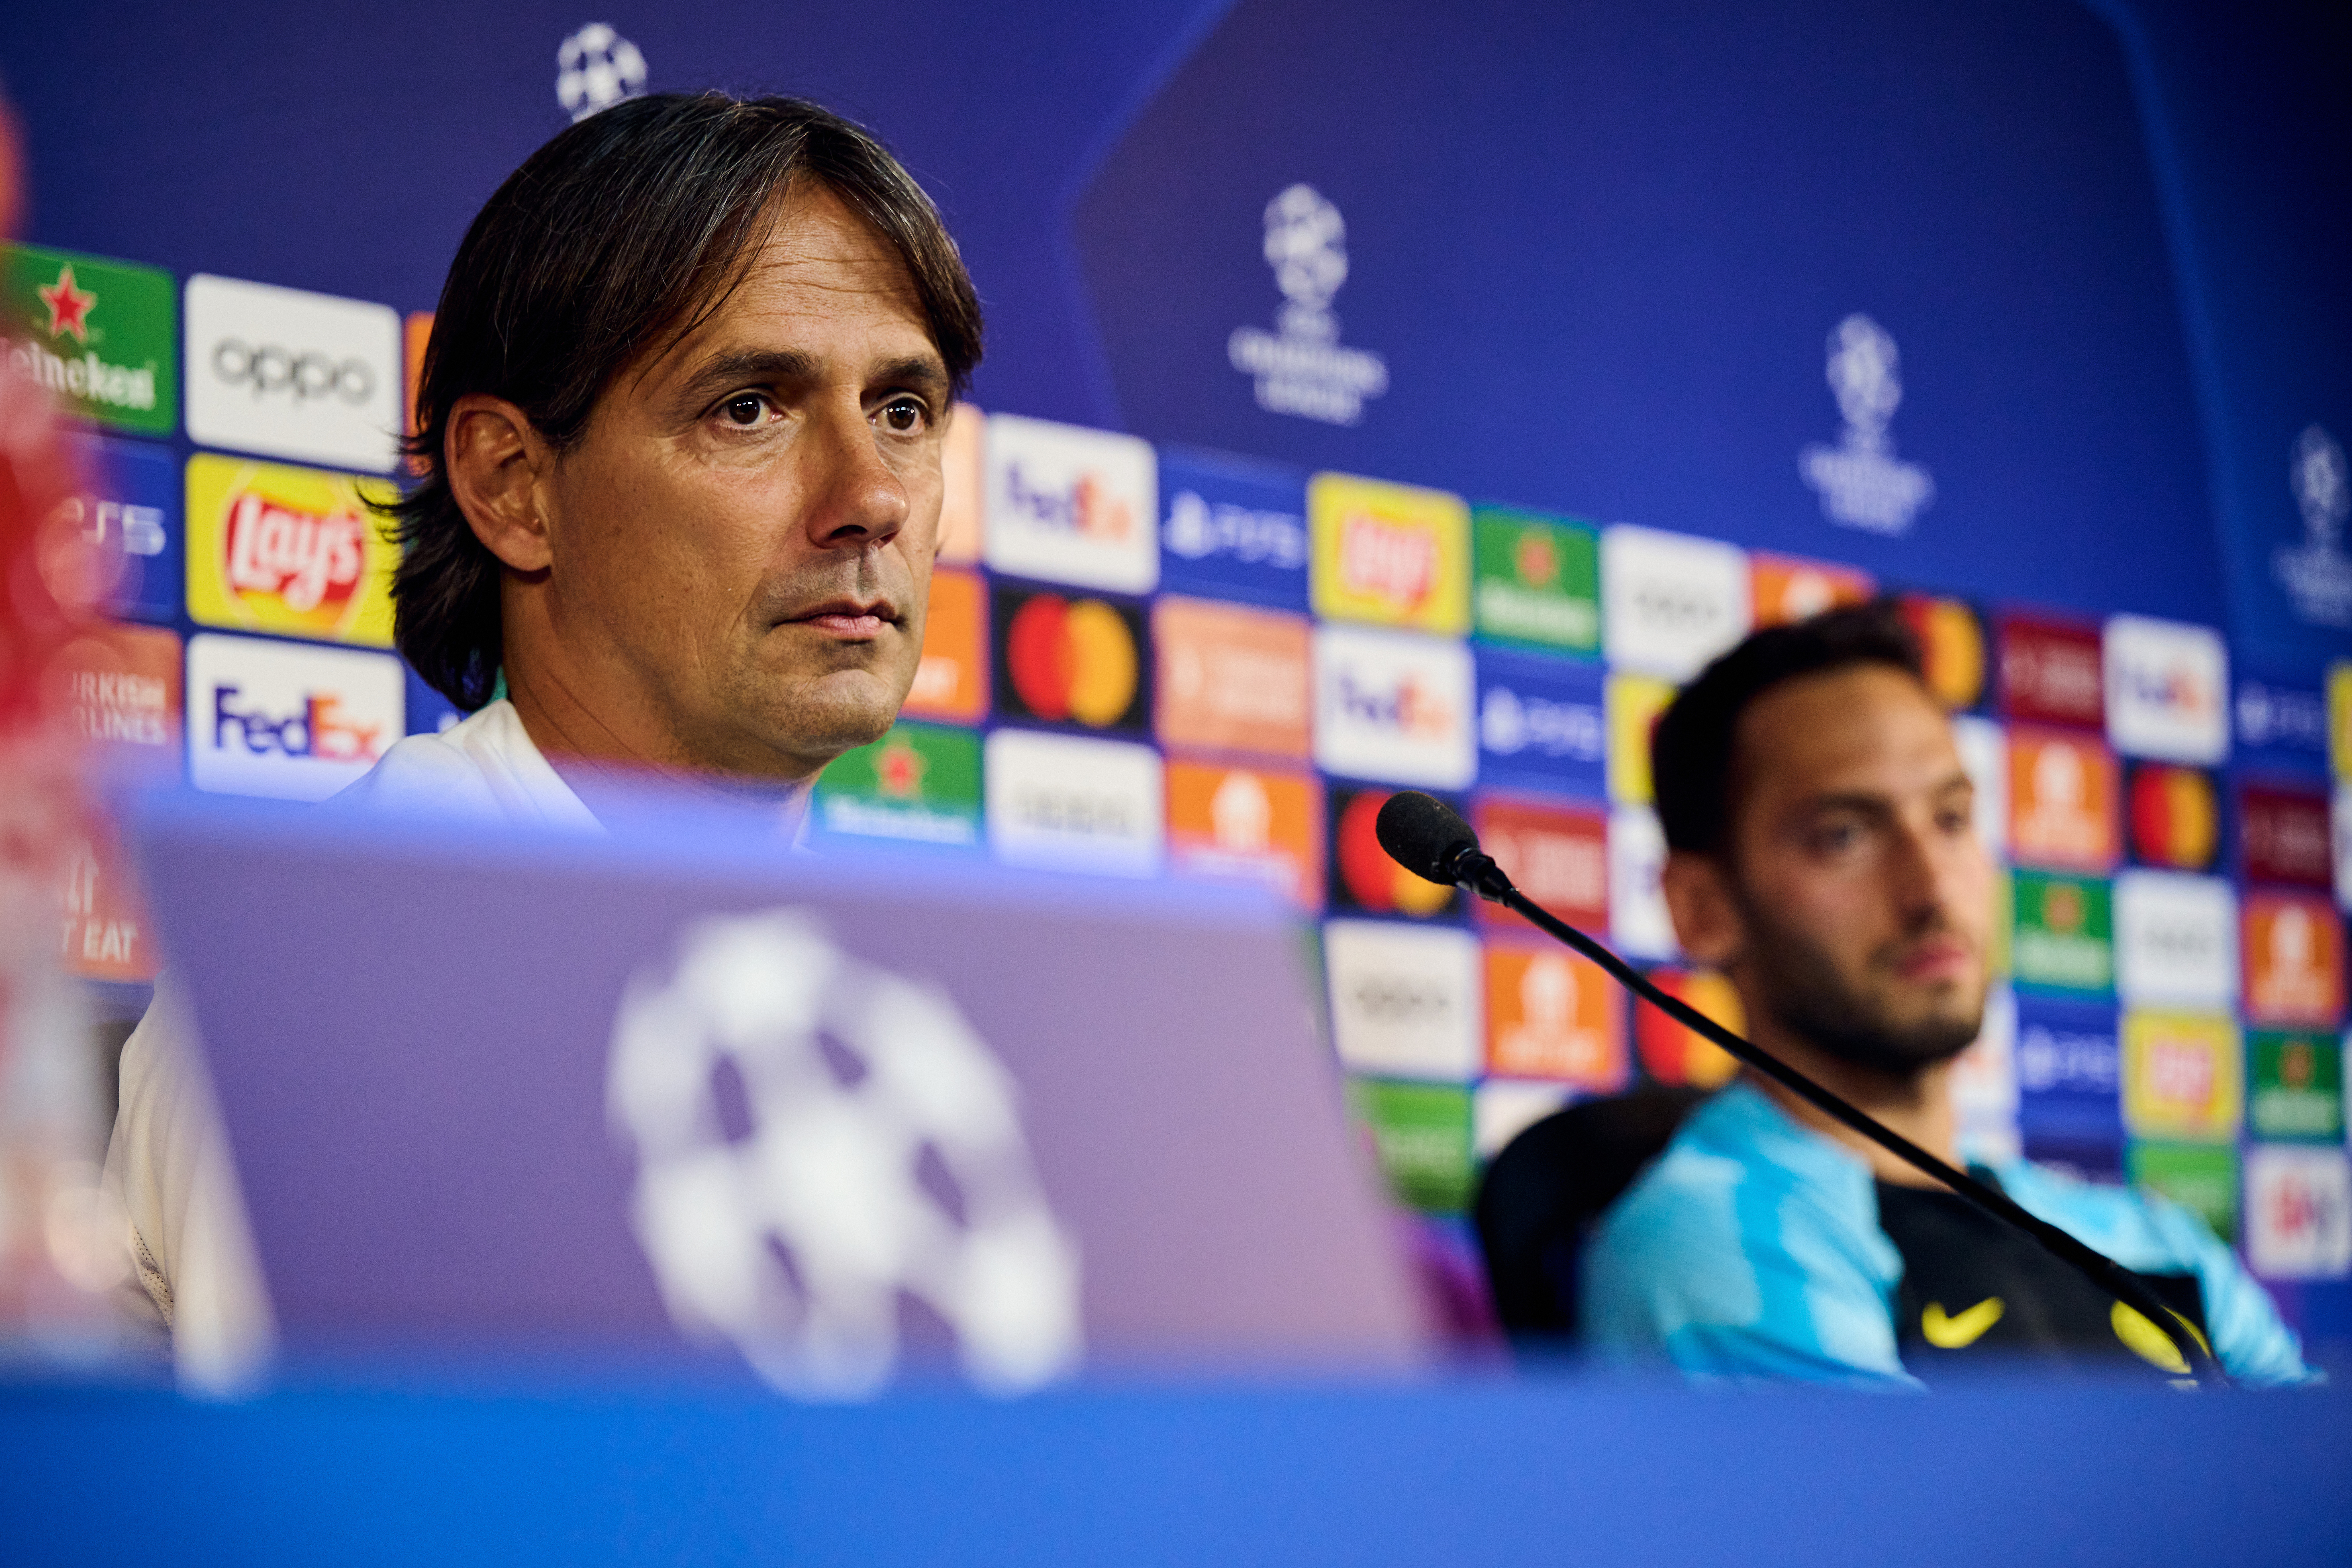 FC Internazionale Training Session And Press Conference